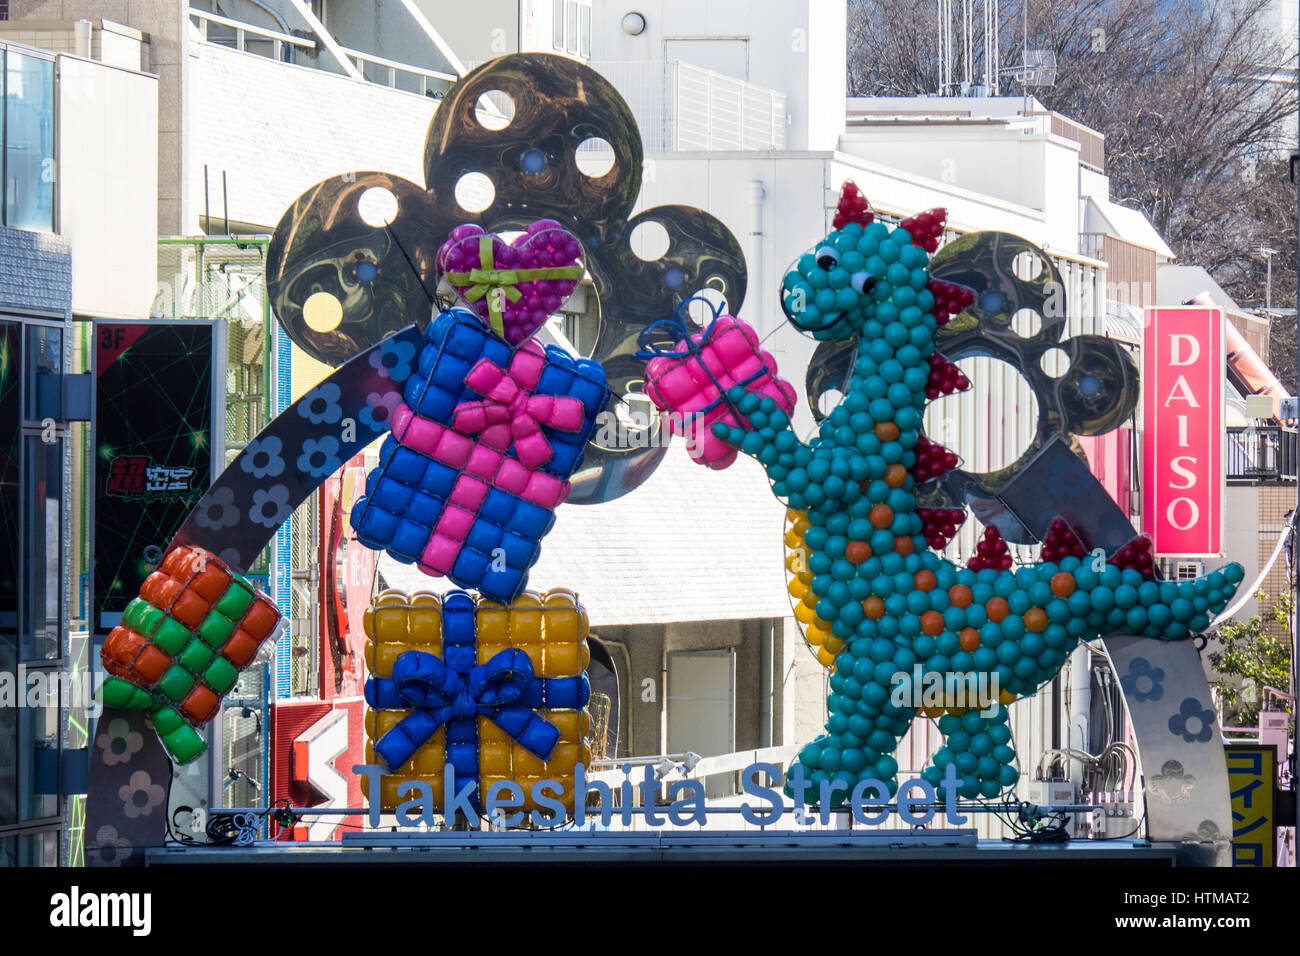 A dinosaur and wrapped packages ago of the Takeshita Street gateway. Stock Photo